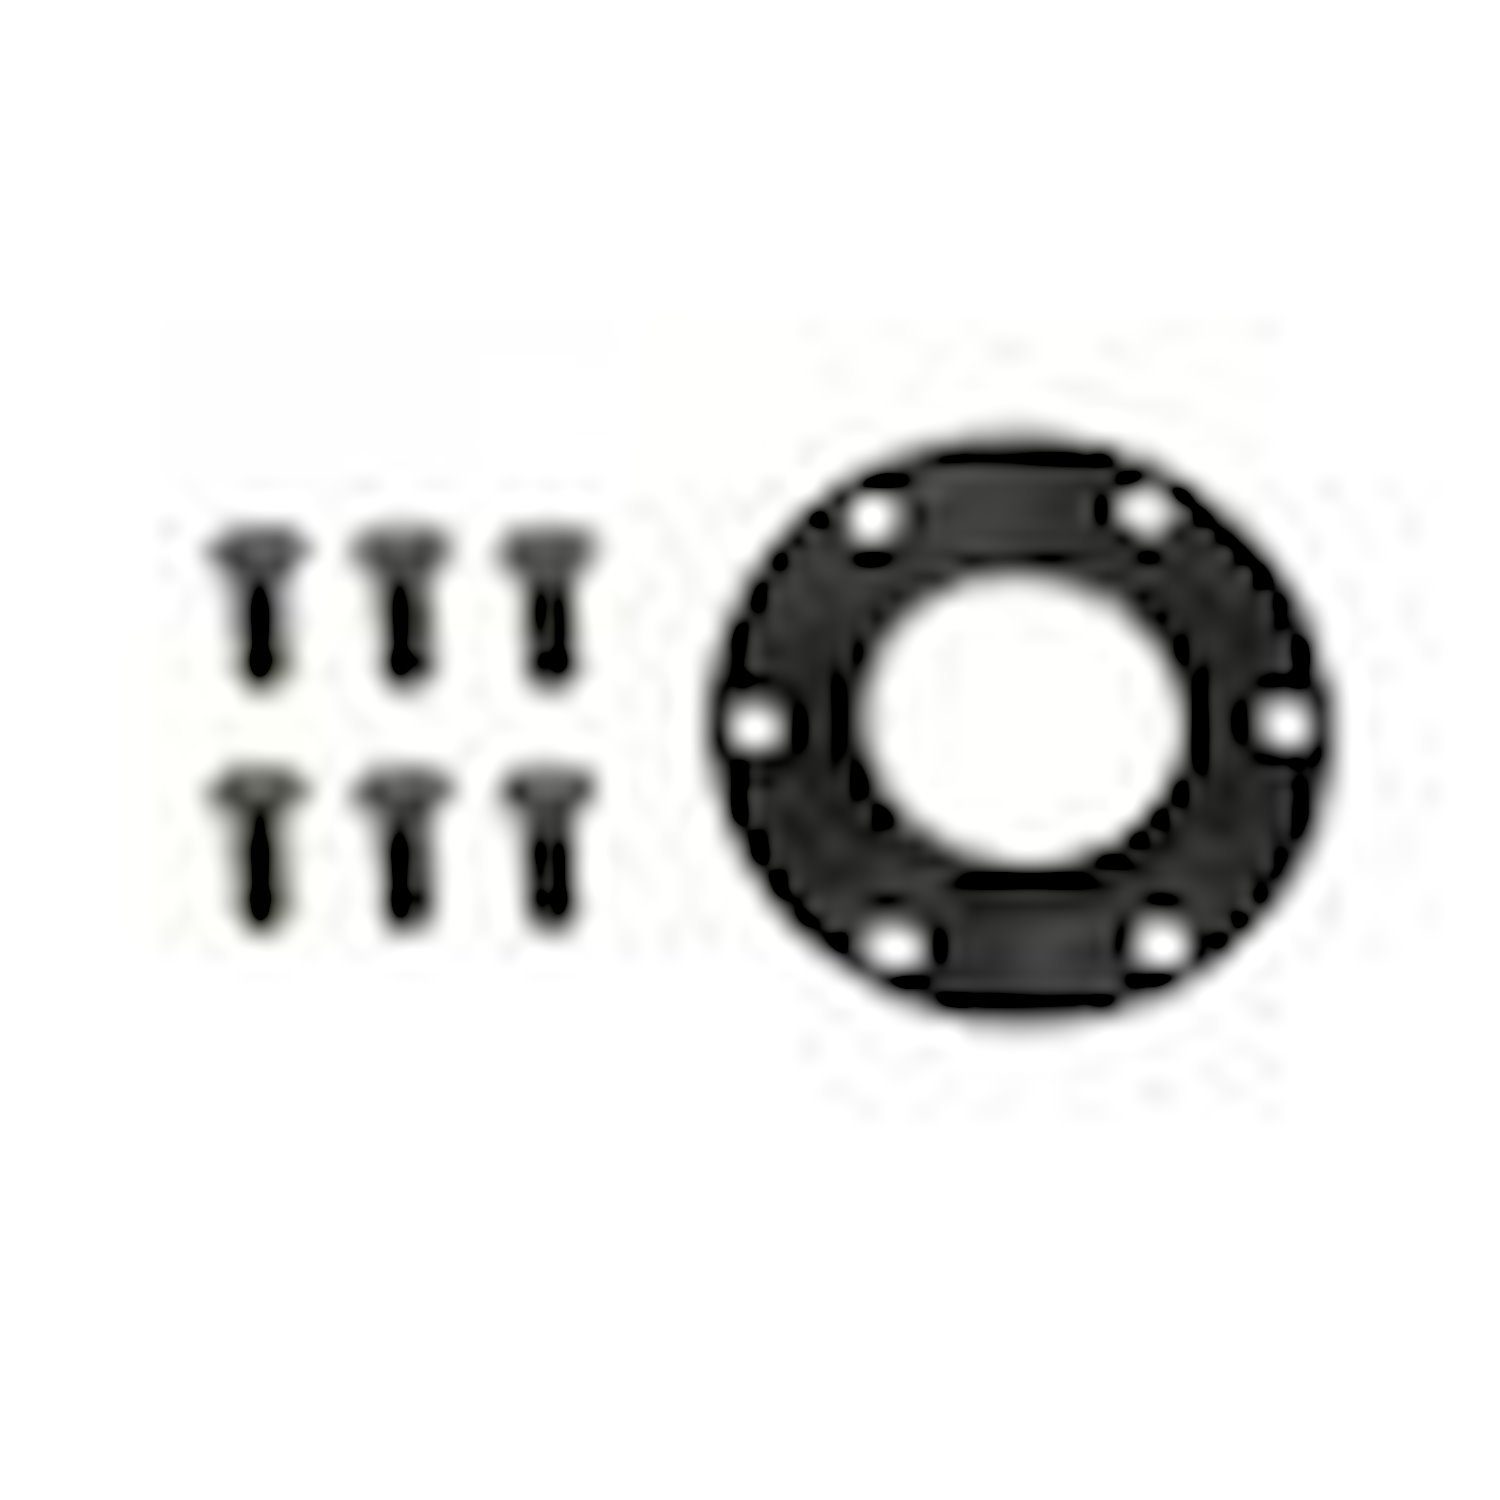 915604 Crank Adapters, Ford To Profit Bell Housing & SFI Flexplate